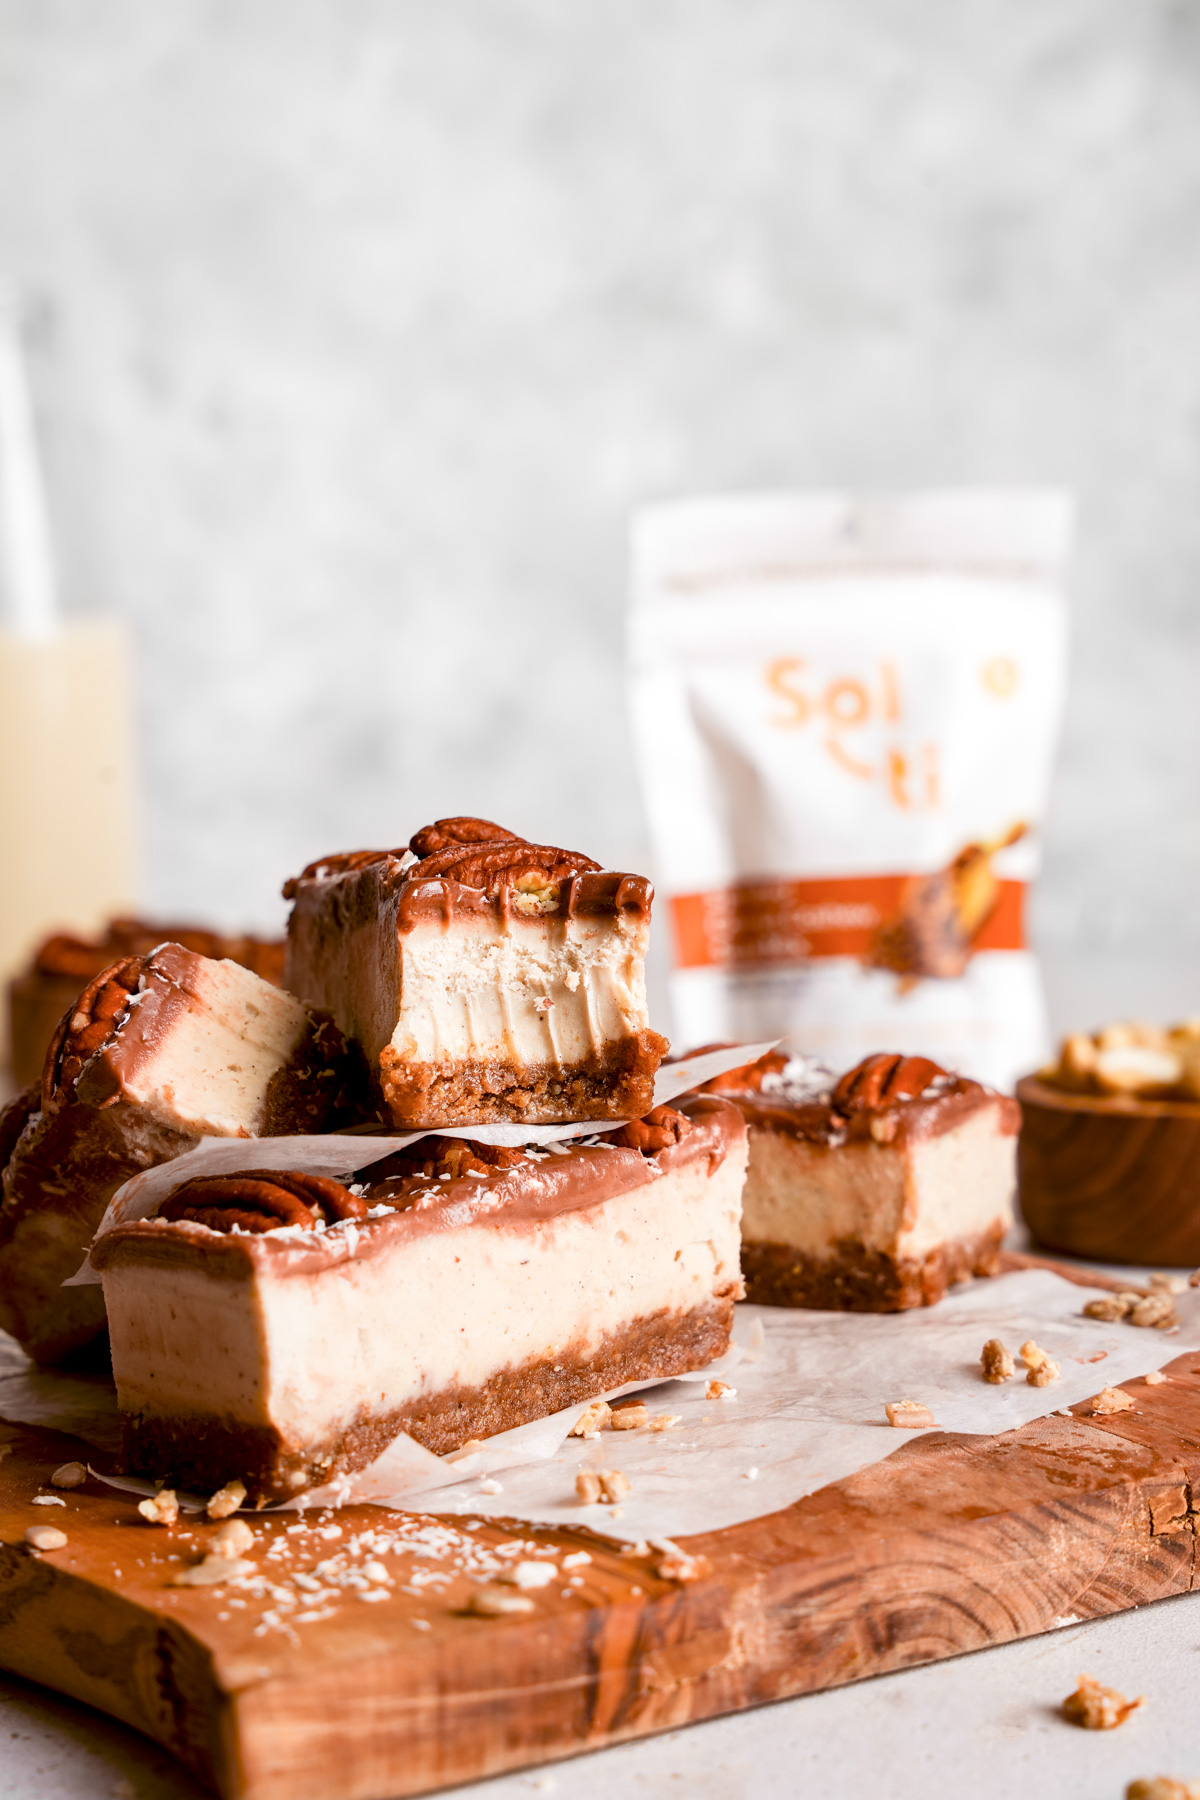 the ice cream bars with the sol-ti supermix